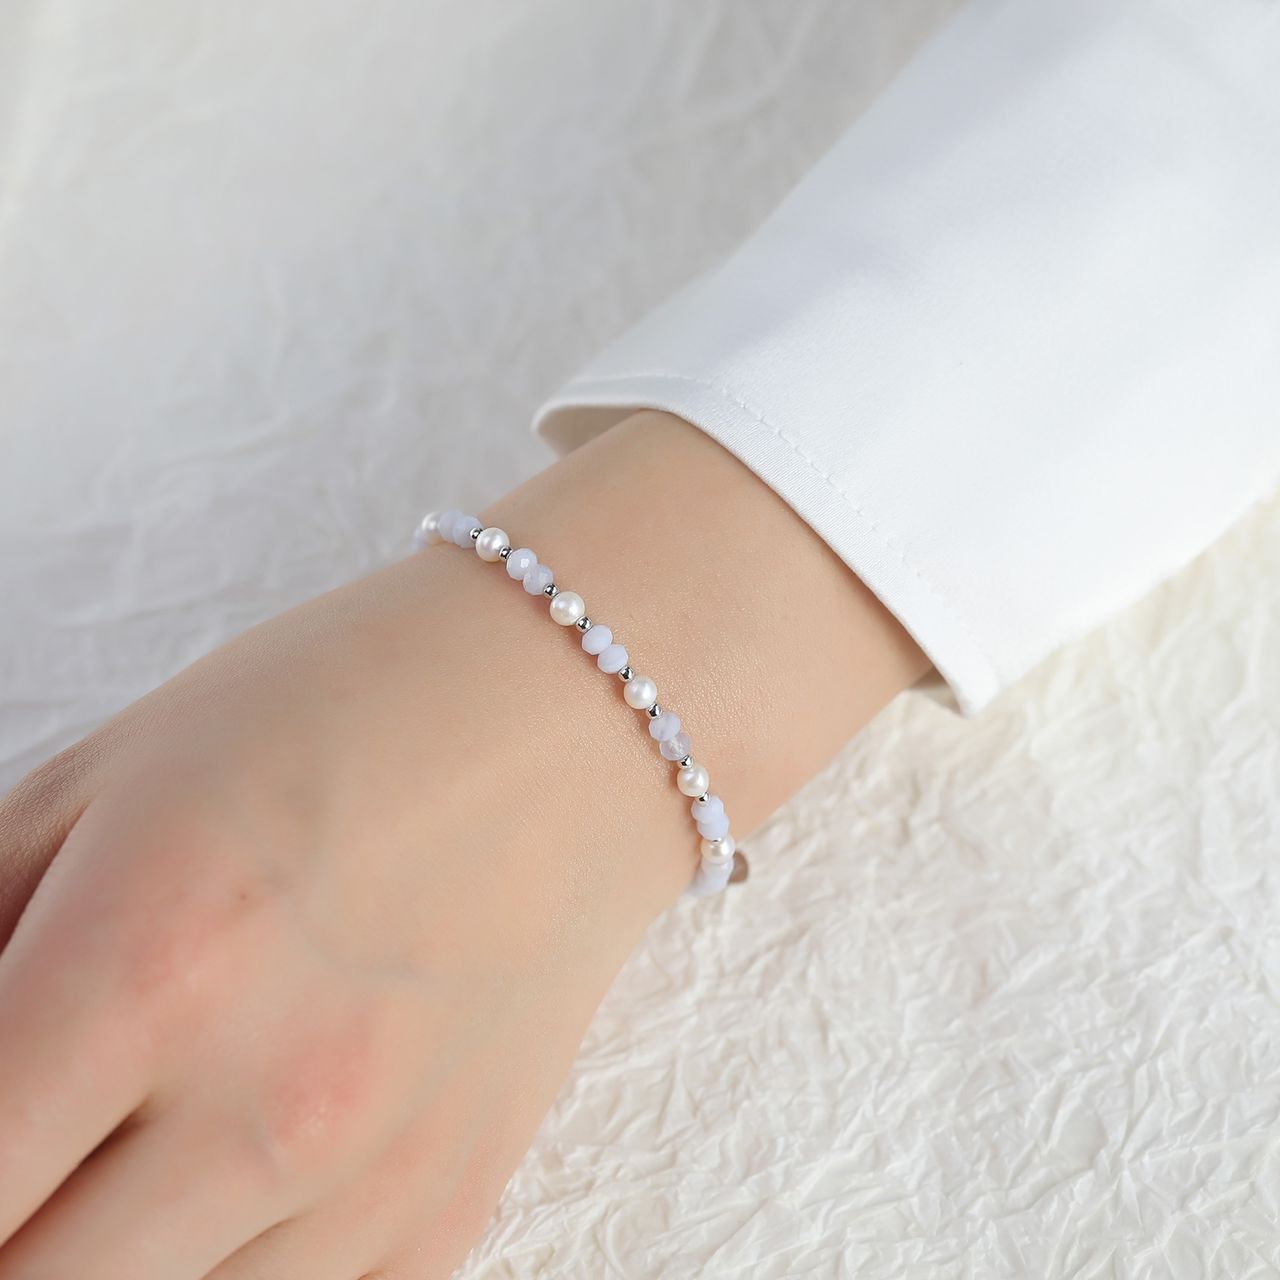 Pearly Care Band Blue Lace Agate Bracelet